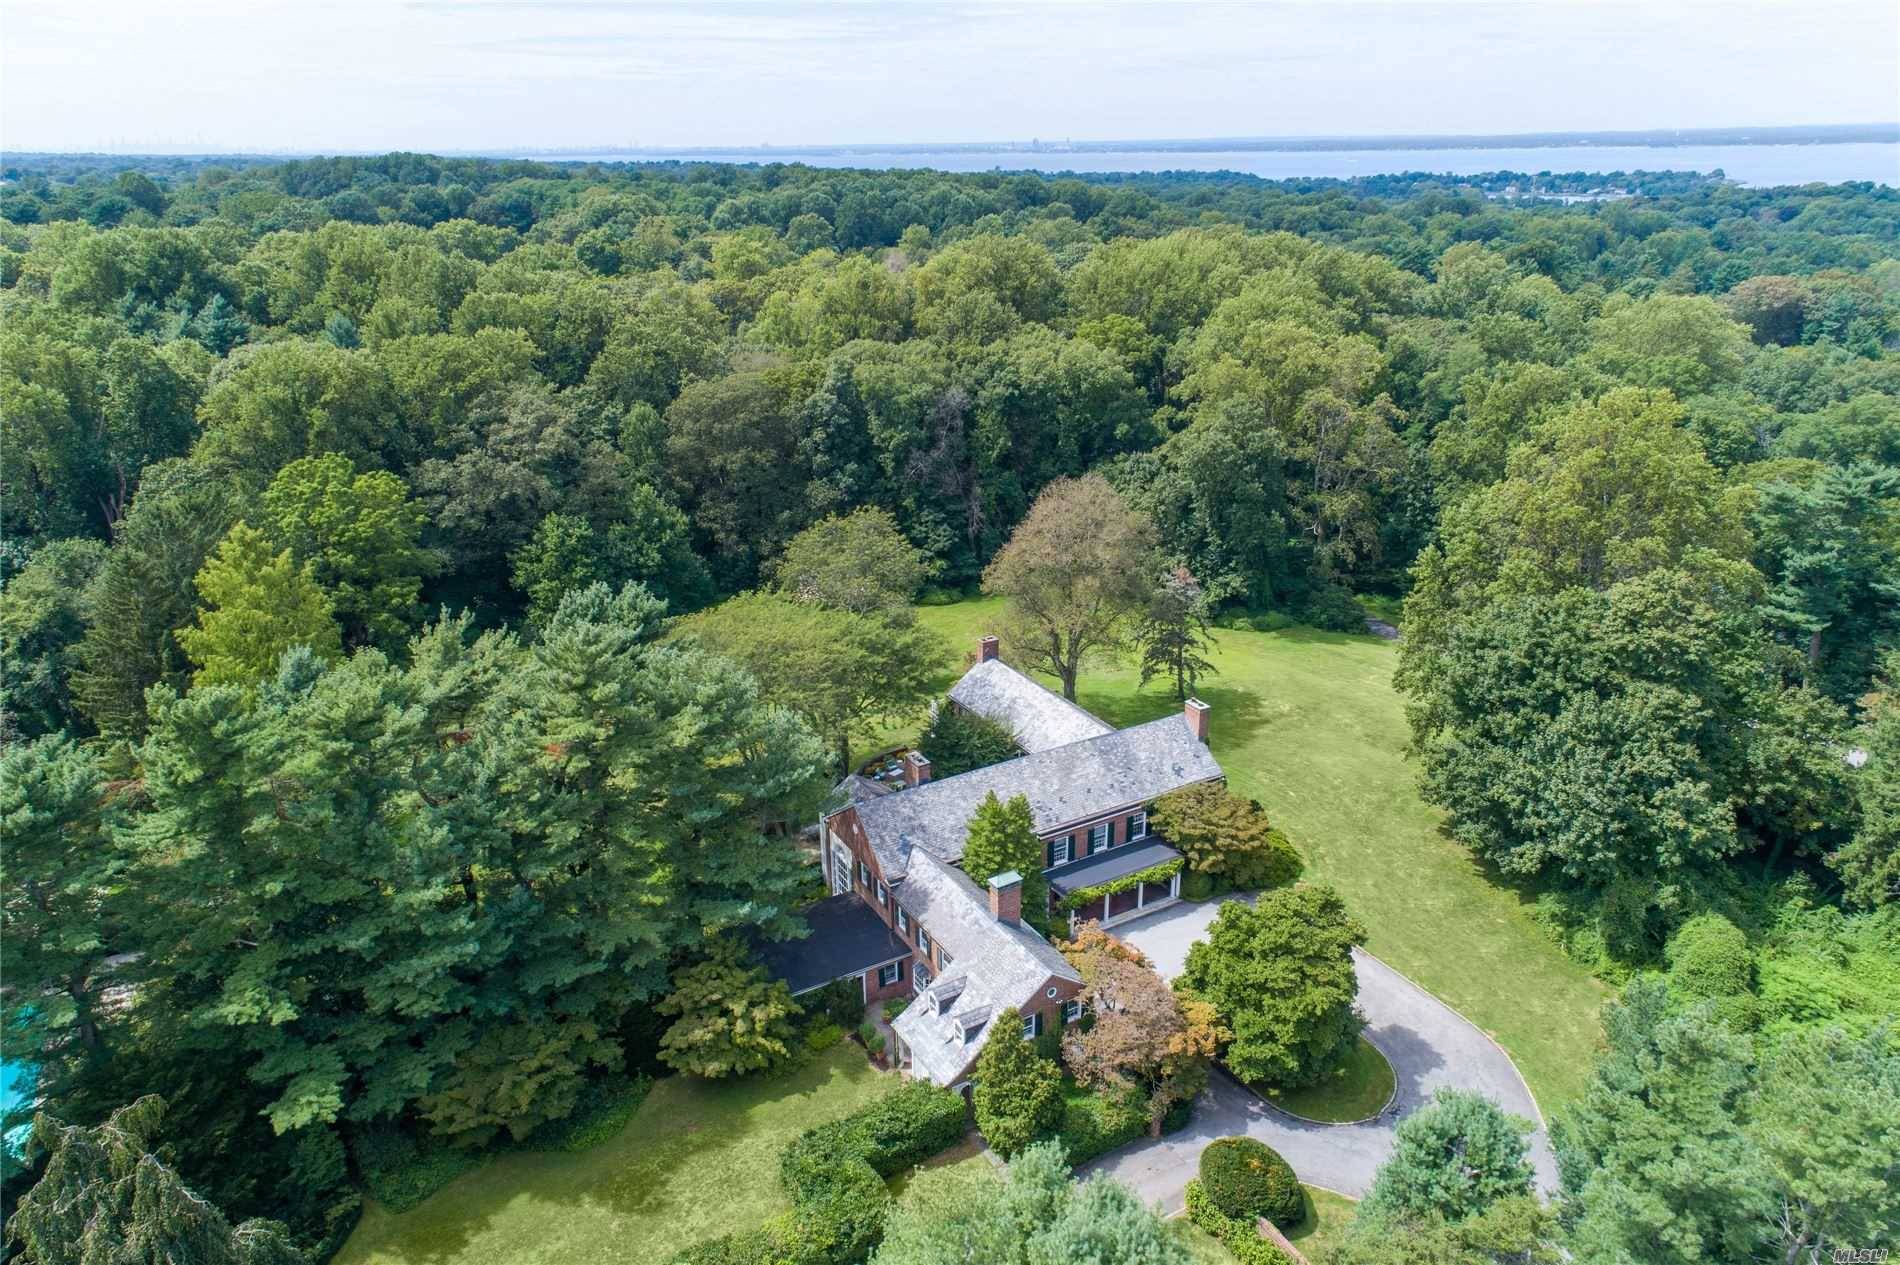 Long Field, designed by renowned architect Bradley Delahanty in 1928, is protected by 10 rolling, serene private acres.